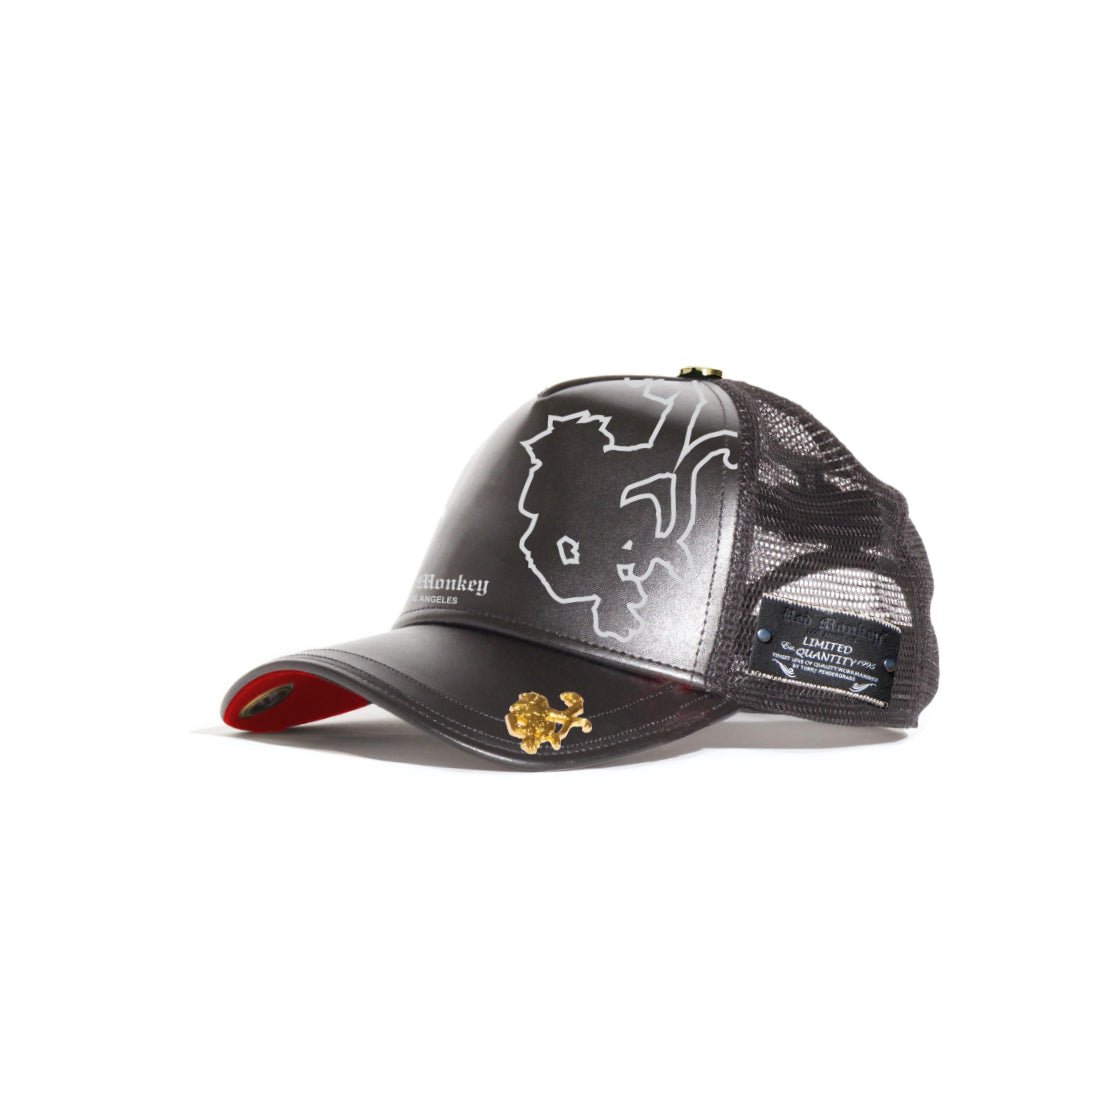 Red Monkey RM1347 Limited Edition Trucker Cap - Black & White - قبعة - Store 974 | ستور ٩٧٤